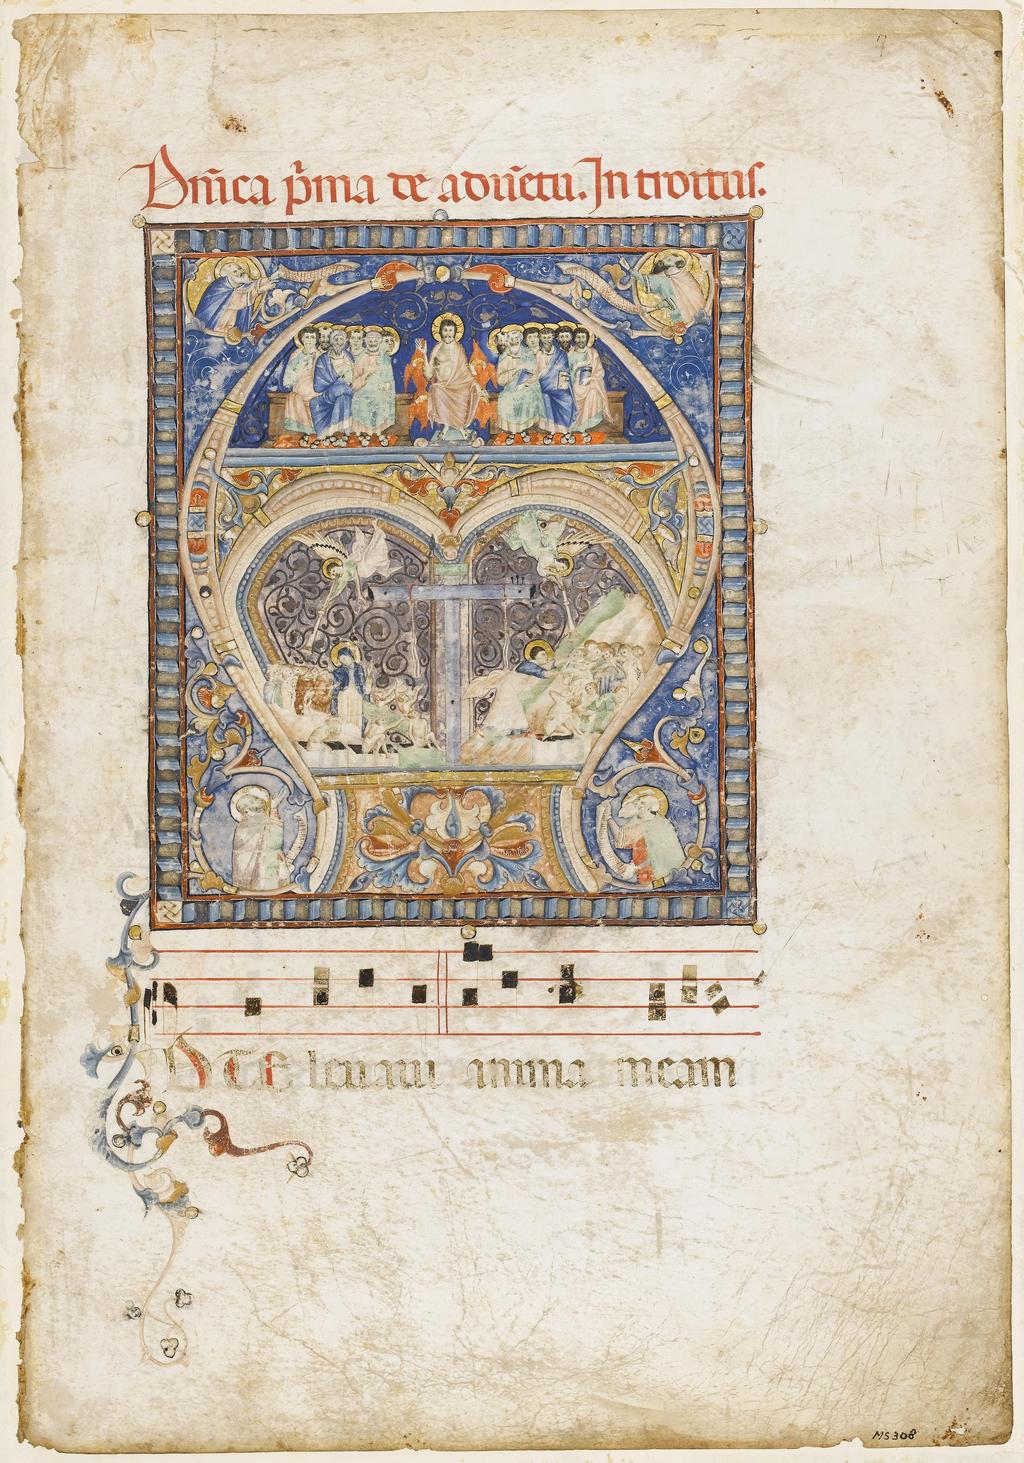 An image of Illuminated Manuscript. Leaf from a Gradual. Latin, Gothic bookhand (textualis). Parchment, 550 x 370 mm (370 x 240 mm), initial 278 x 237 mm, rubric and one line of text ruled in hard point, one four-line musical stave ruled in red ink, pasted on cardboard, six lines of text and six four-line musical staves on reverse (discernible on a light box). Production Place: Siena, Italy. Circa 1325.CONTENTS: Rubric, Dominica prima de adventu. Introitus and Introit of the Mass for the first Sunday in Advent, Ad te levavi animam meam. Historiated initial in faded pink on blue ground with delicate white motifs within a geometric frame for the Introit of the Mass for the first Sunday in Advent: [A, 4 lines of text and 4 musical staves] Last Judgment, with (above) Christ enthroned, flanked by seraphim, displaying wounds and accompanied by a group of six Apostles on either side, and (below) the Cross and Instruments of the Passion in the centre with two angels blowing trumpets above, on the left the Virgin standing with the blessed, including Franciscans and St Francis displaying the stigmata, and on the right St John pointing at the damned, acanthus branches extending from the initial to enclose a half-length figure of a prophet with a scroll in each corner. ORNAMENTATION: Foliate scroll with acanthus extending into lower left margin; capitals highlighted in red. 